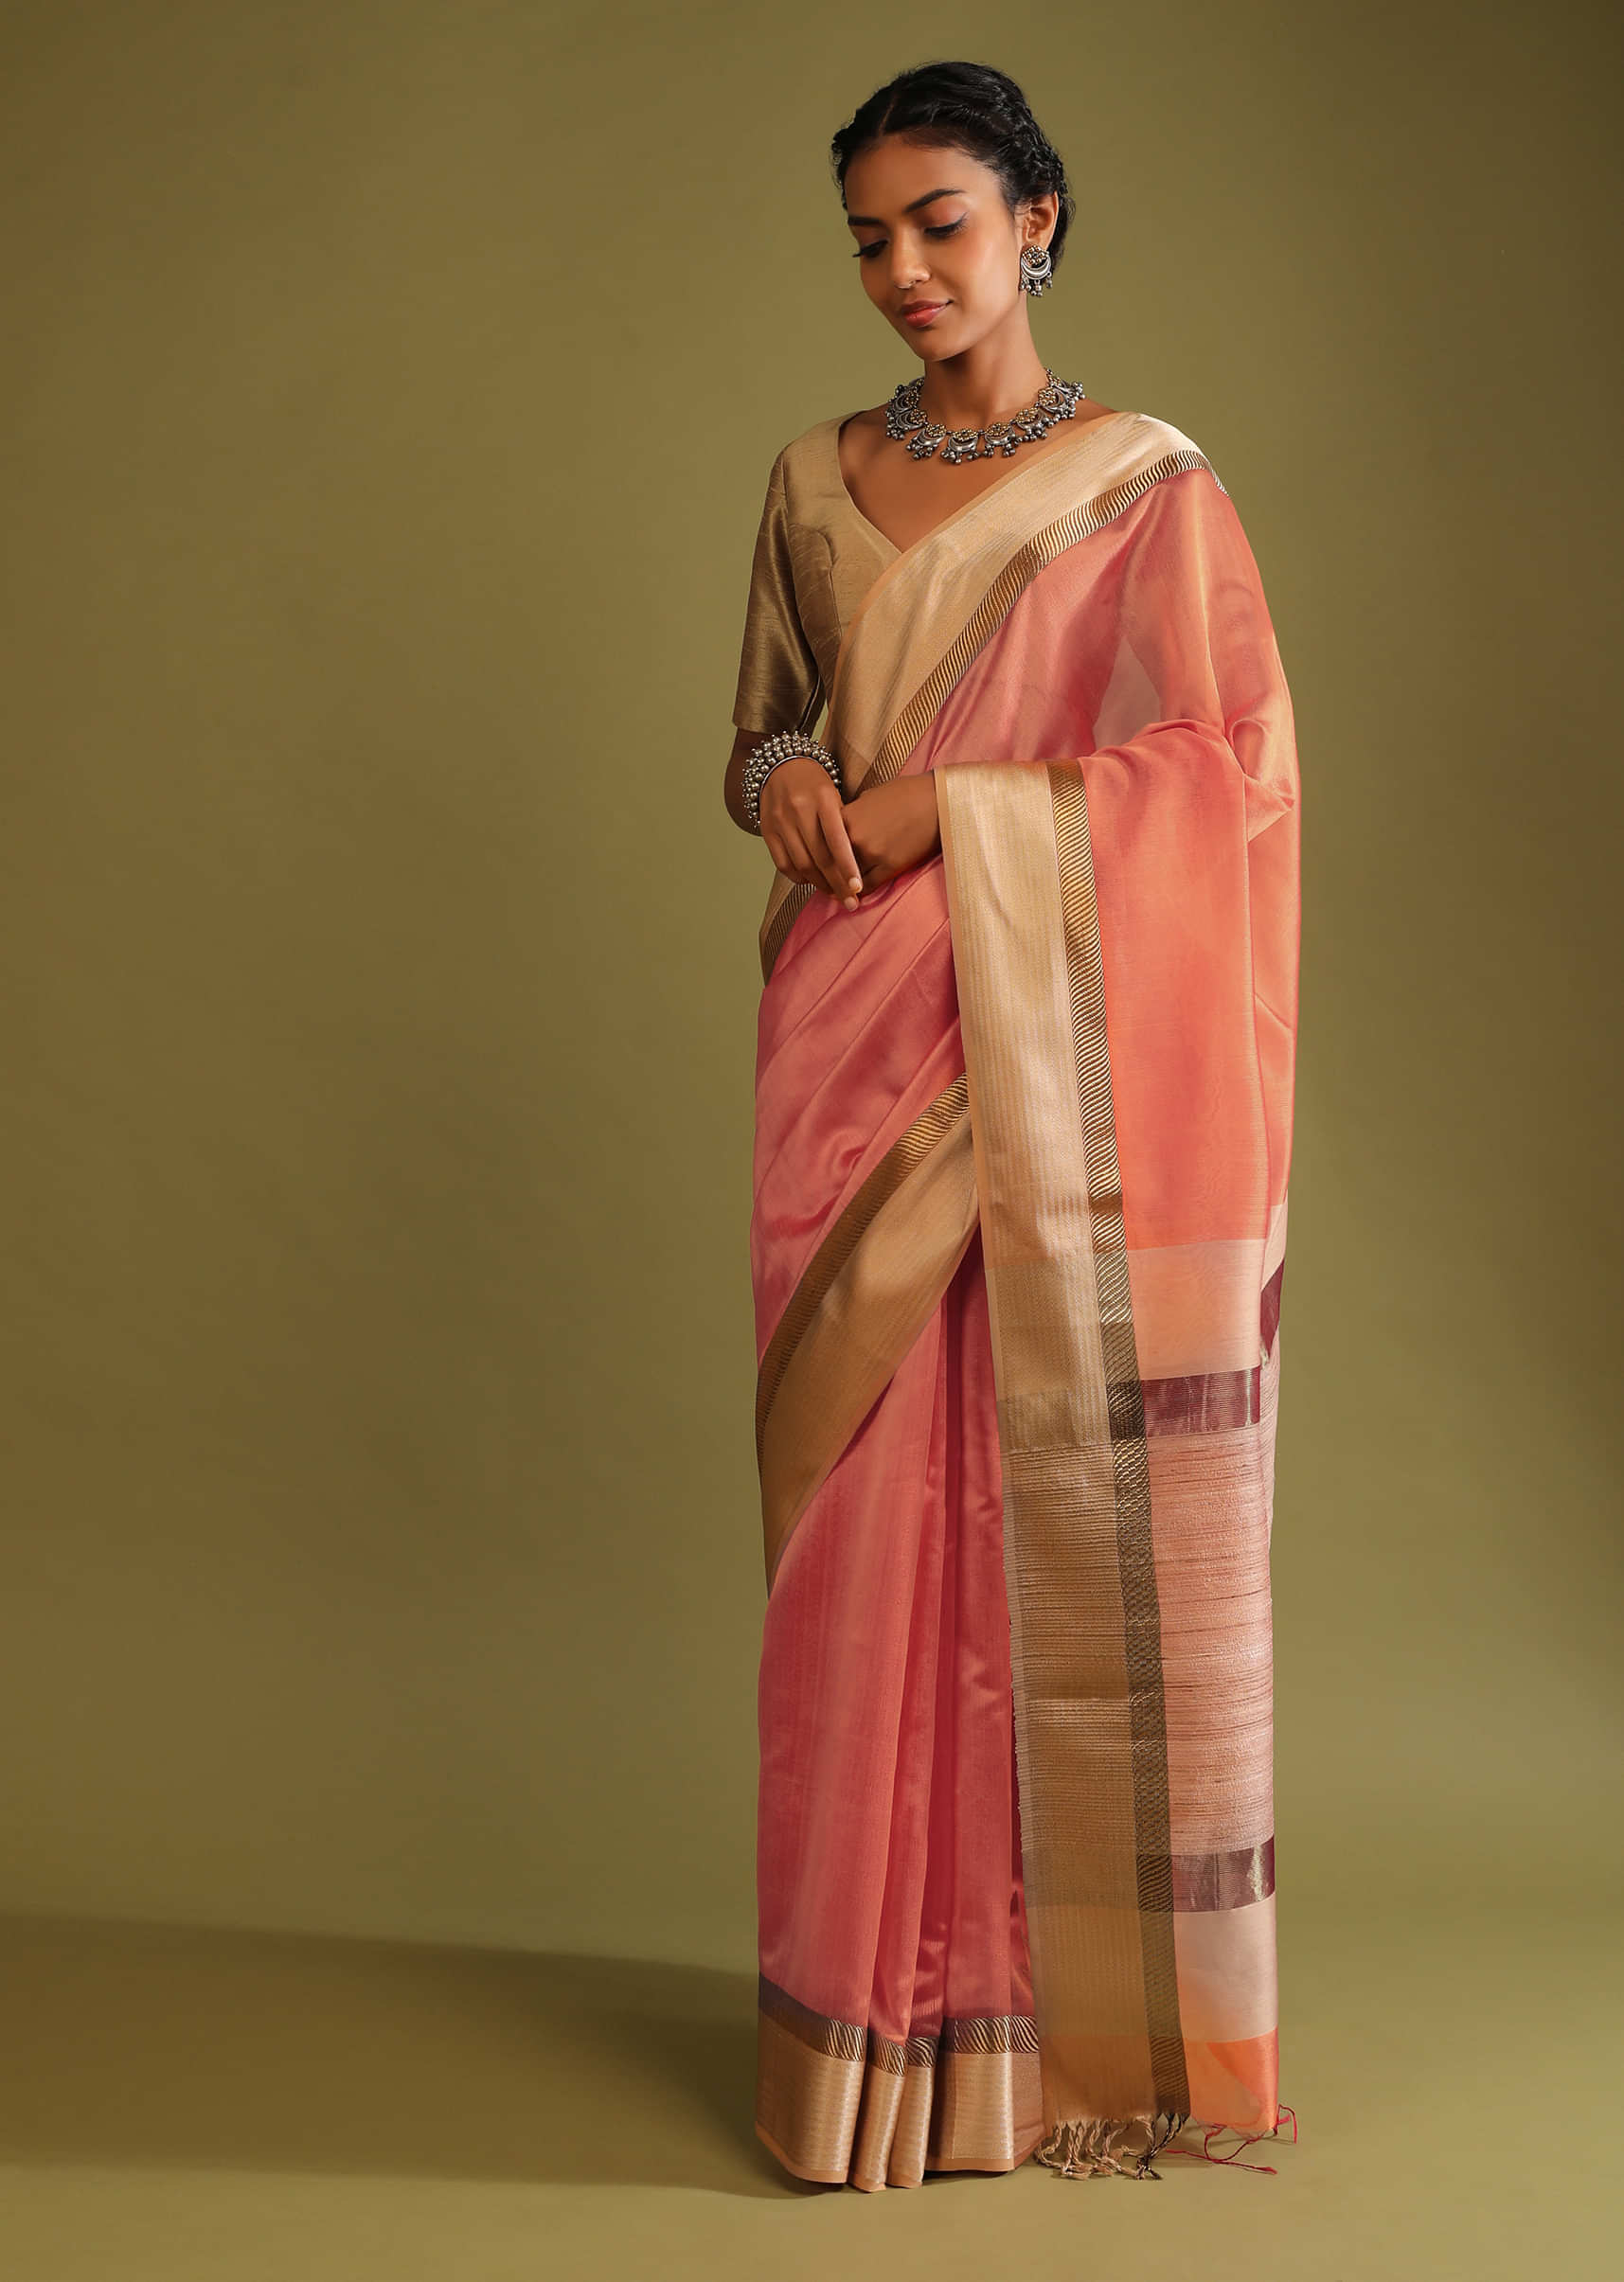 Carrot Coral Saree In Tussar Silk With A Contrasting Woven Golden Border And Textured Tussar Detailing On The Pallu  